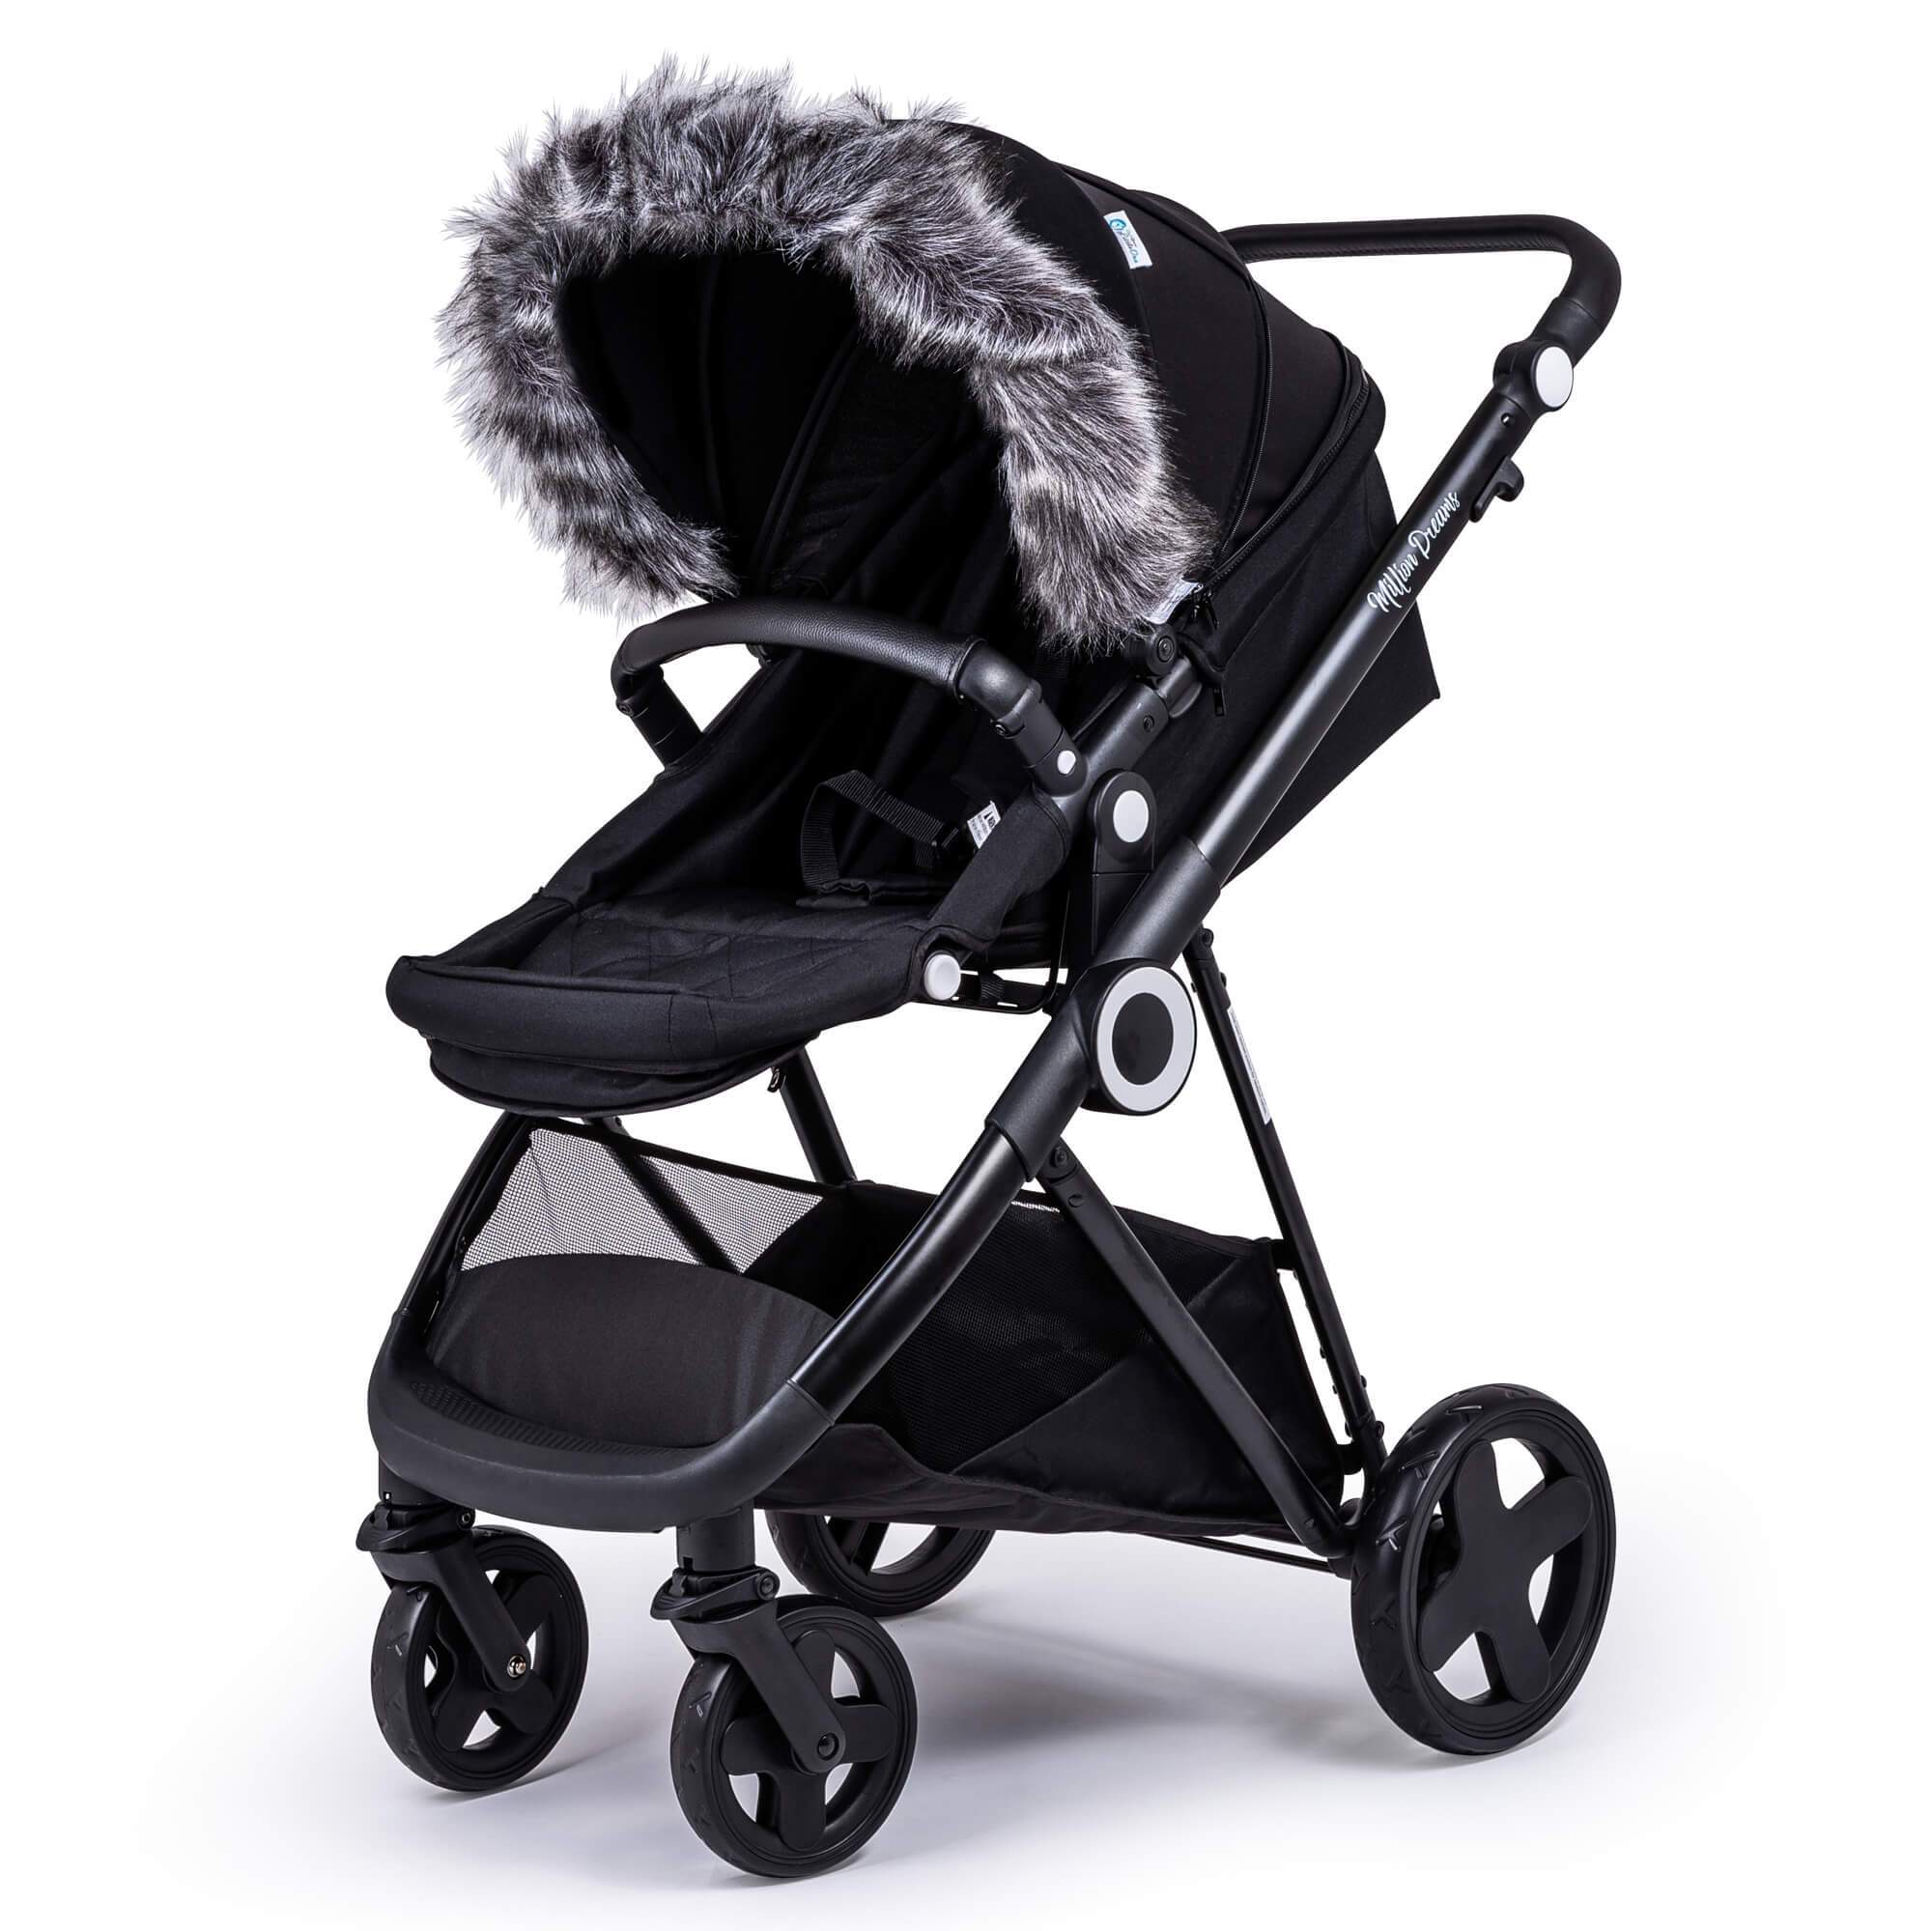 Pram Fur Hood Trim Attachment for Pushchair Compatible with Brio - Dark Grey / Fits All Models | For Your Little One